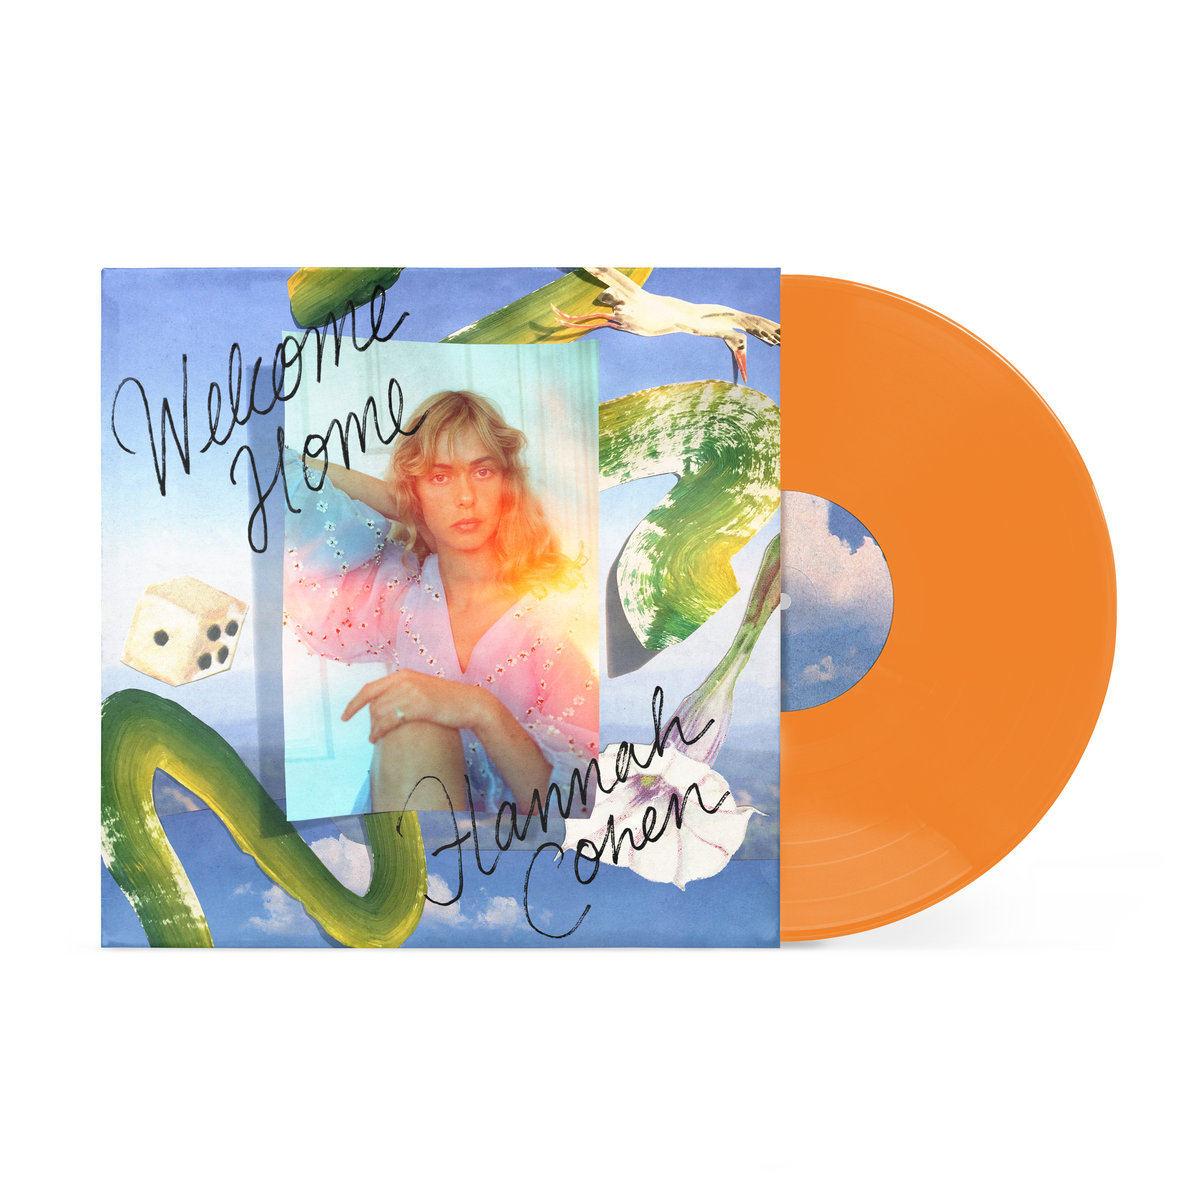 This beaut of an album from Hannah Cohen has turned 5 🧡 If you haven’t listened to “Welcome Home” yet, we guarantee it’ll make you swoon: hannahcohen.bandcamp.com